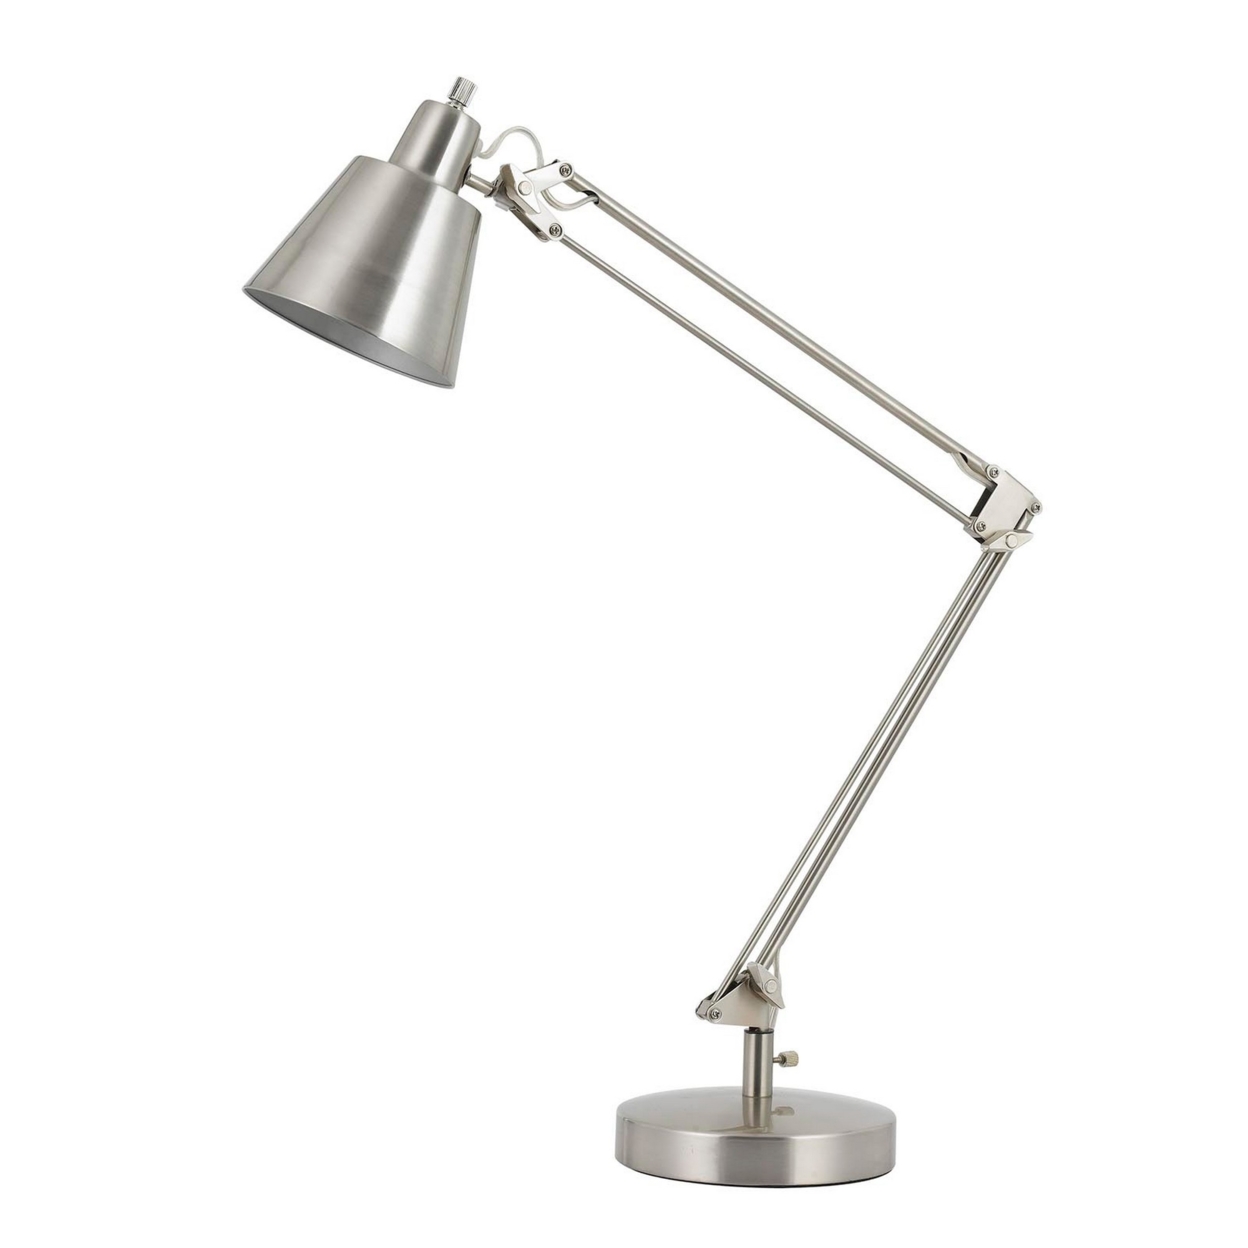 60W Metal Task Lamp With Adjustable Arms And Swivel Head, Set Of 2, Silver- Saltoro Sherpi